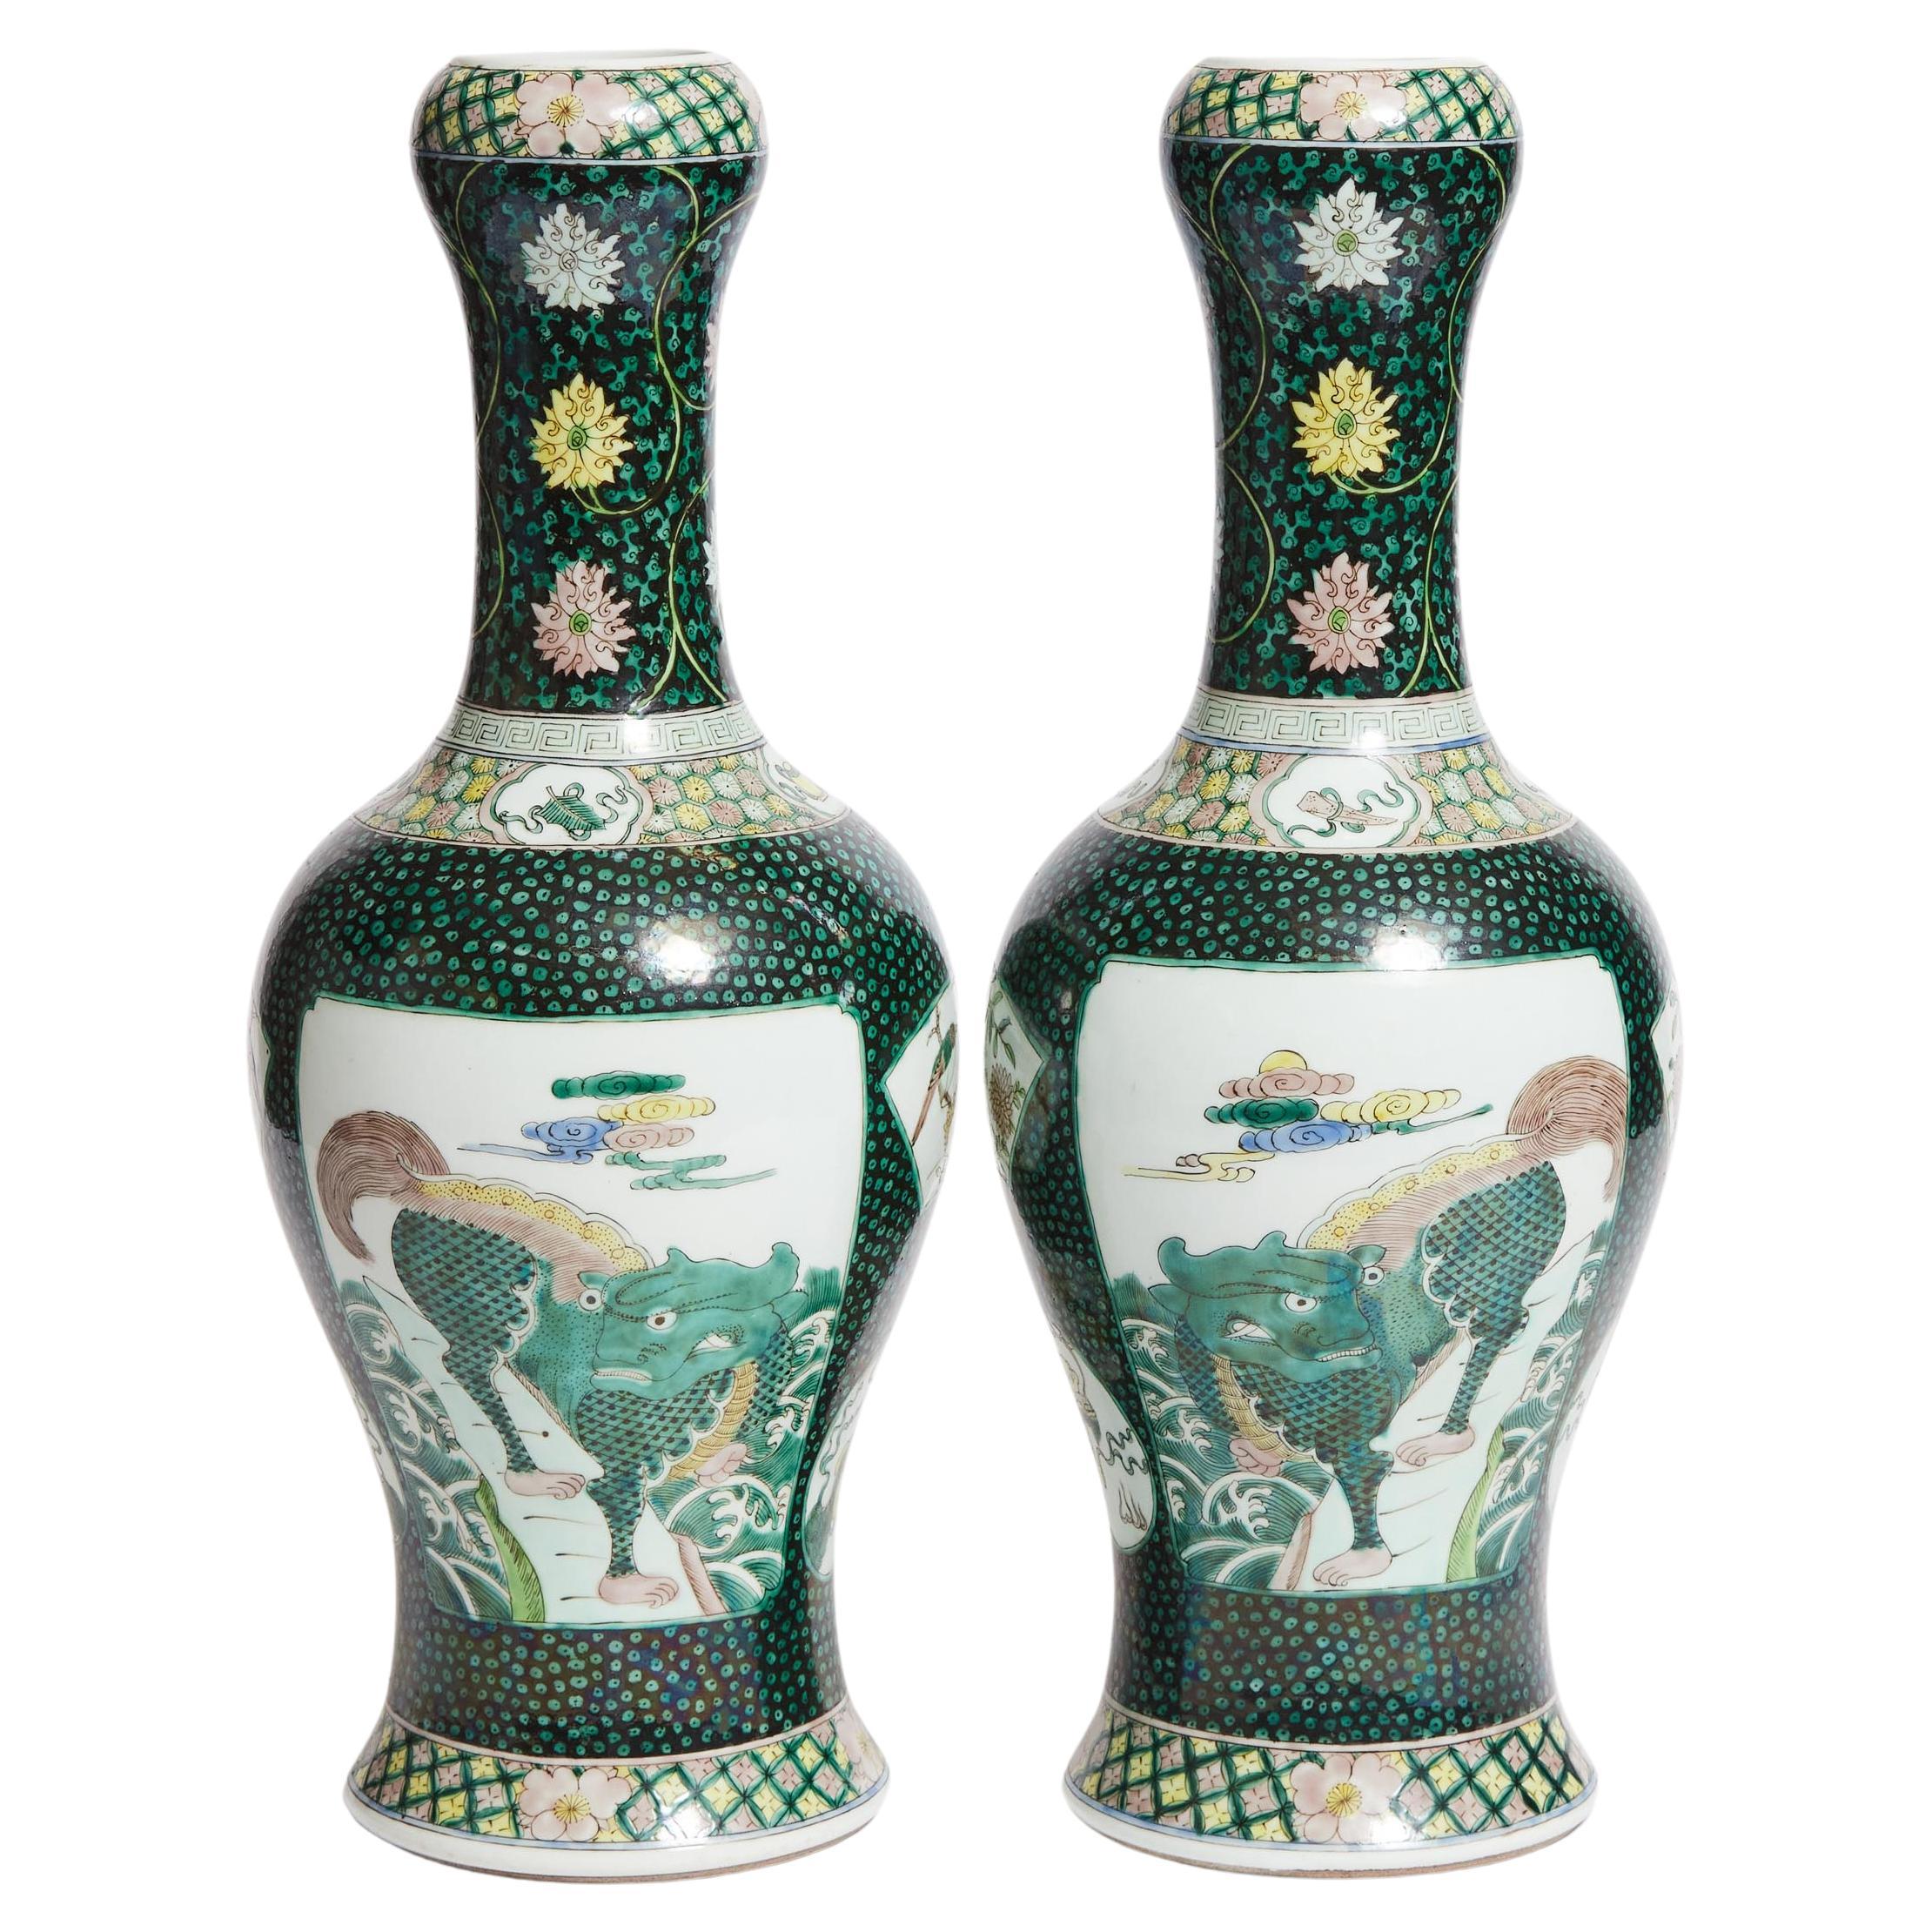 20th Century Chinese Pair of Famille Noire Garlic-Mouth Vases, Kangxi Mark